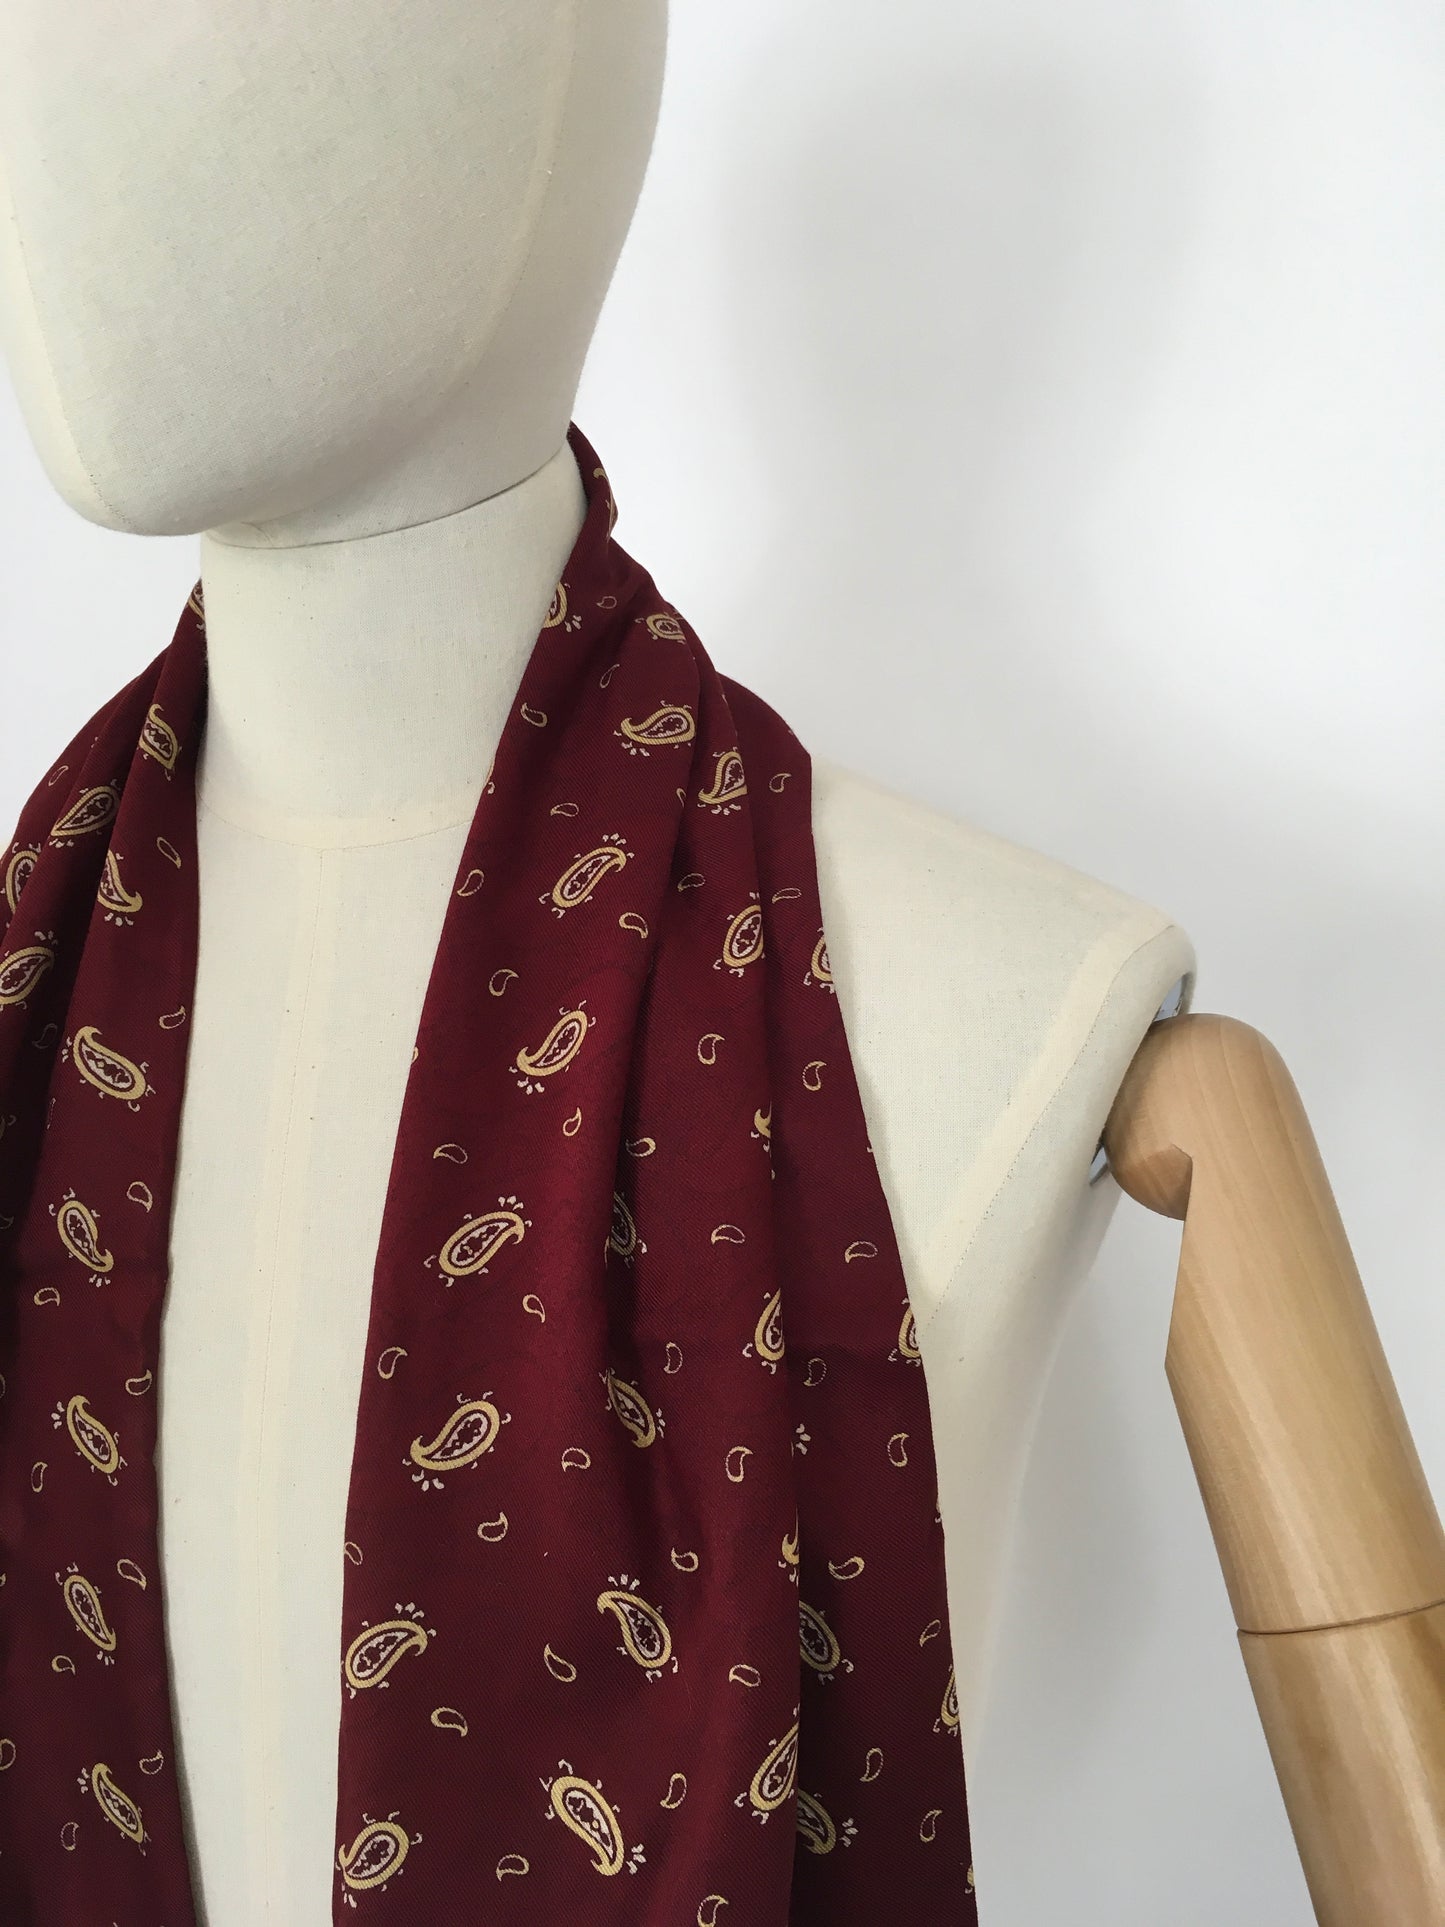 Original 1940’s Mens Scarf - In a Lovely Burgundy, Yellow & Black Paisley Print